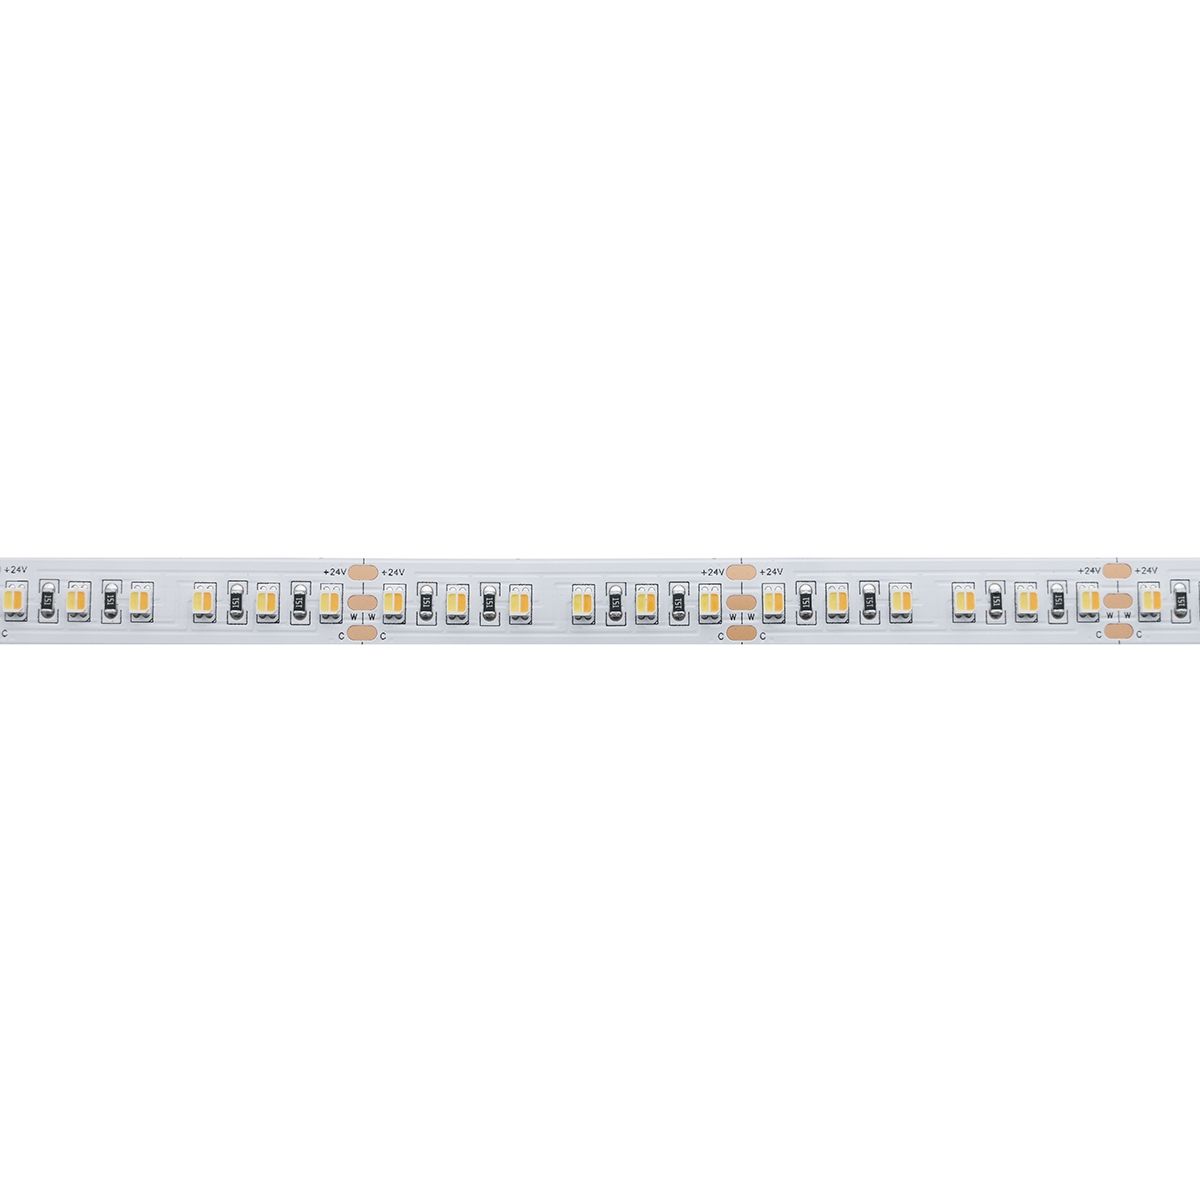 Efficient and Bright Daylight LED Strips by Finnish Company